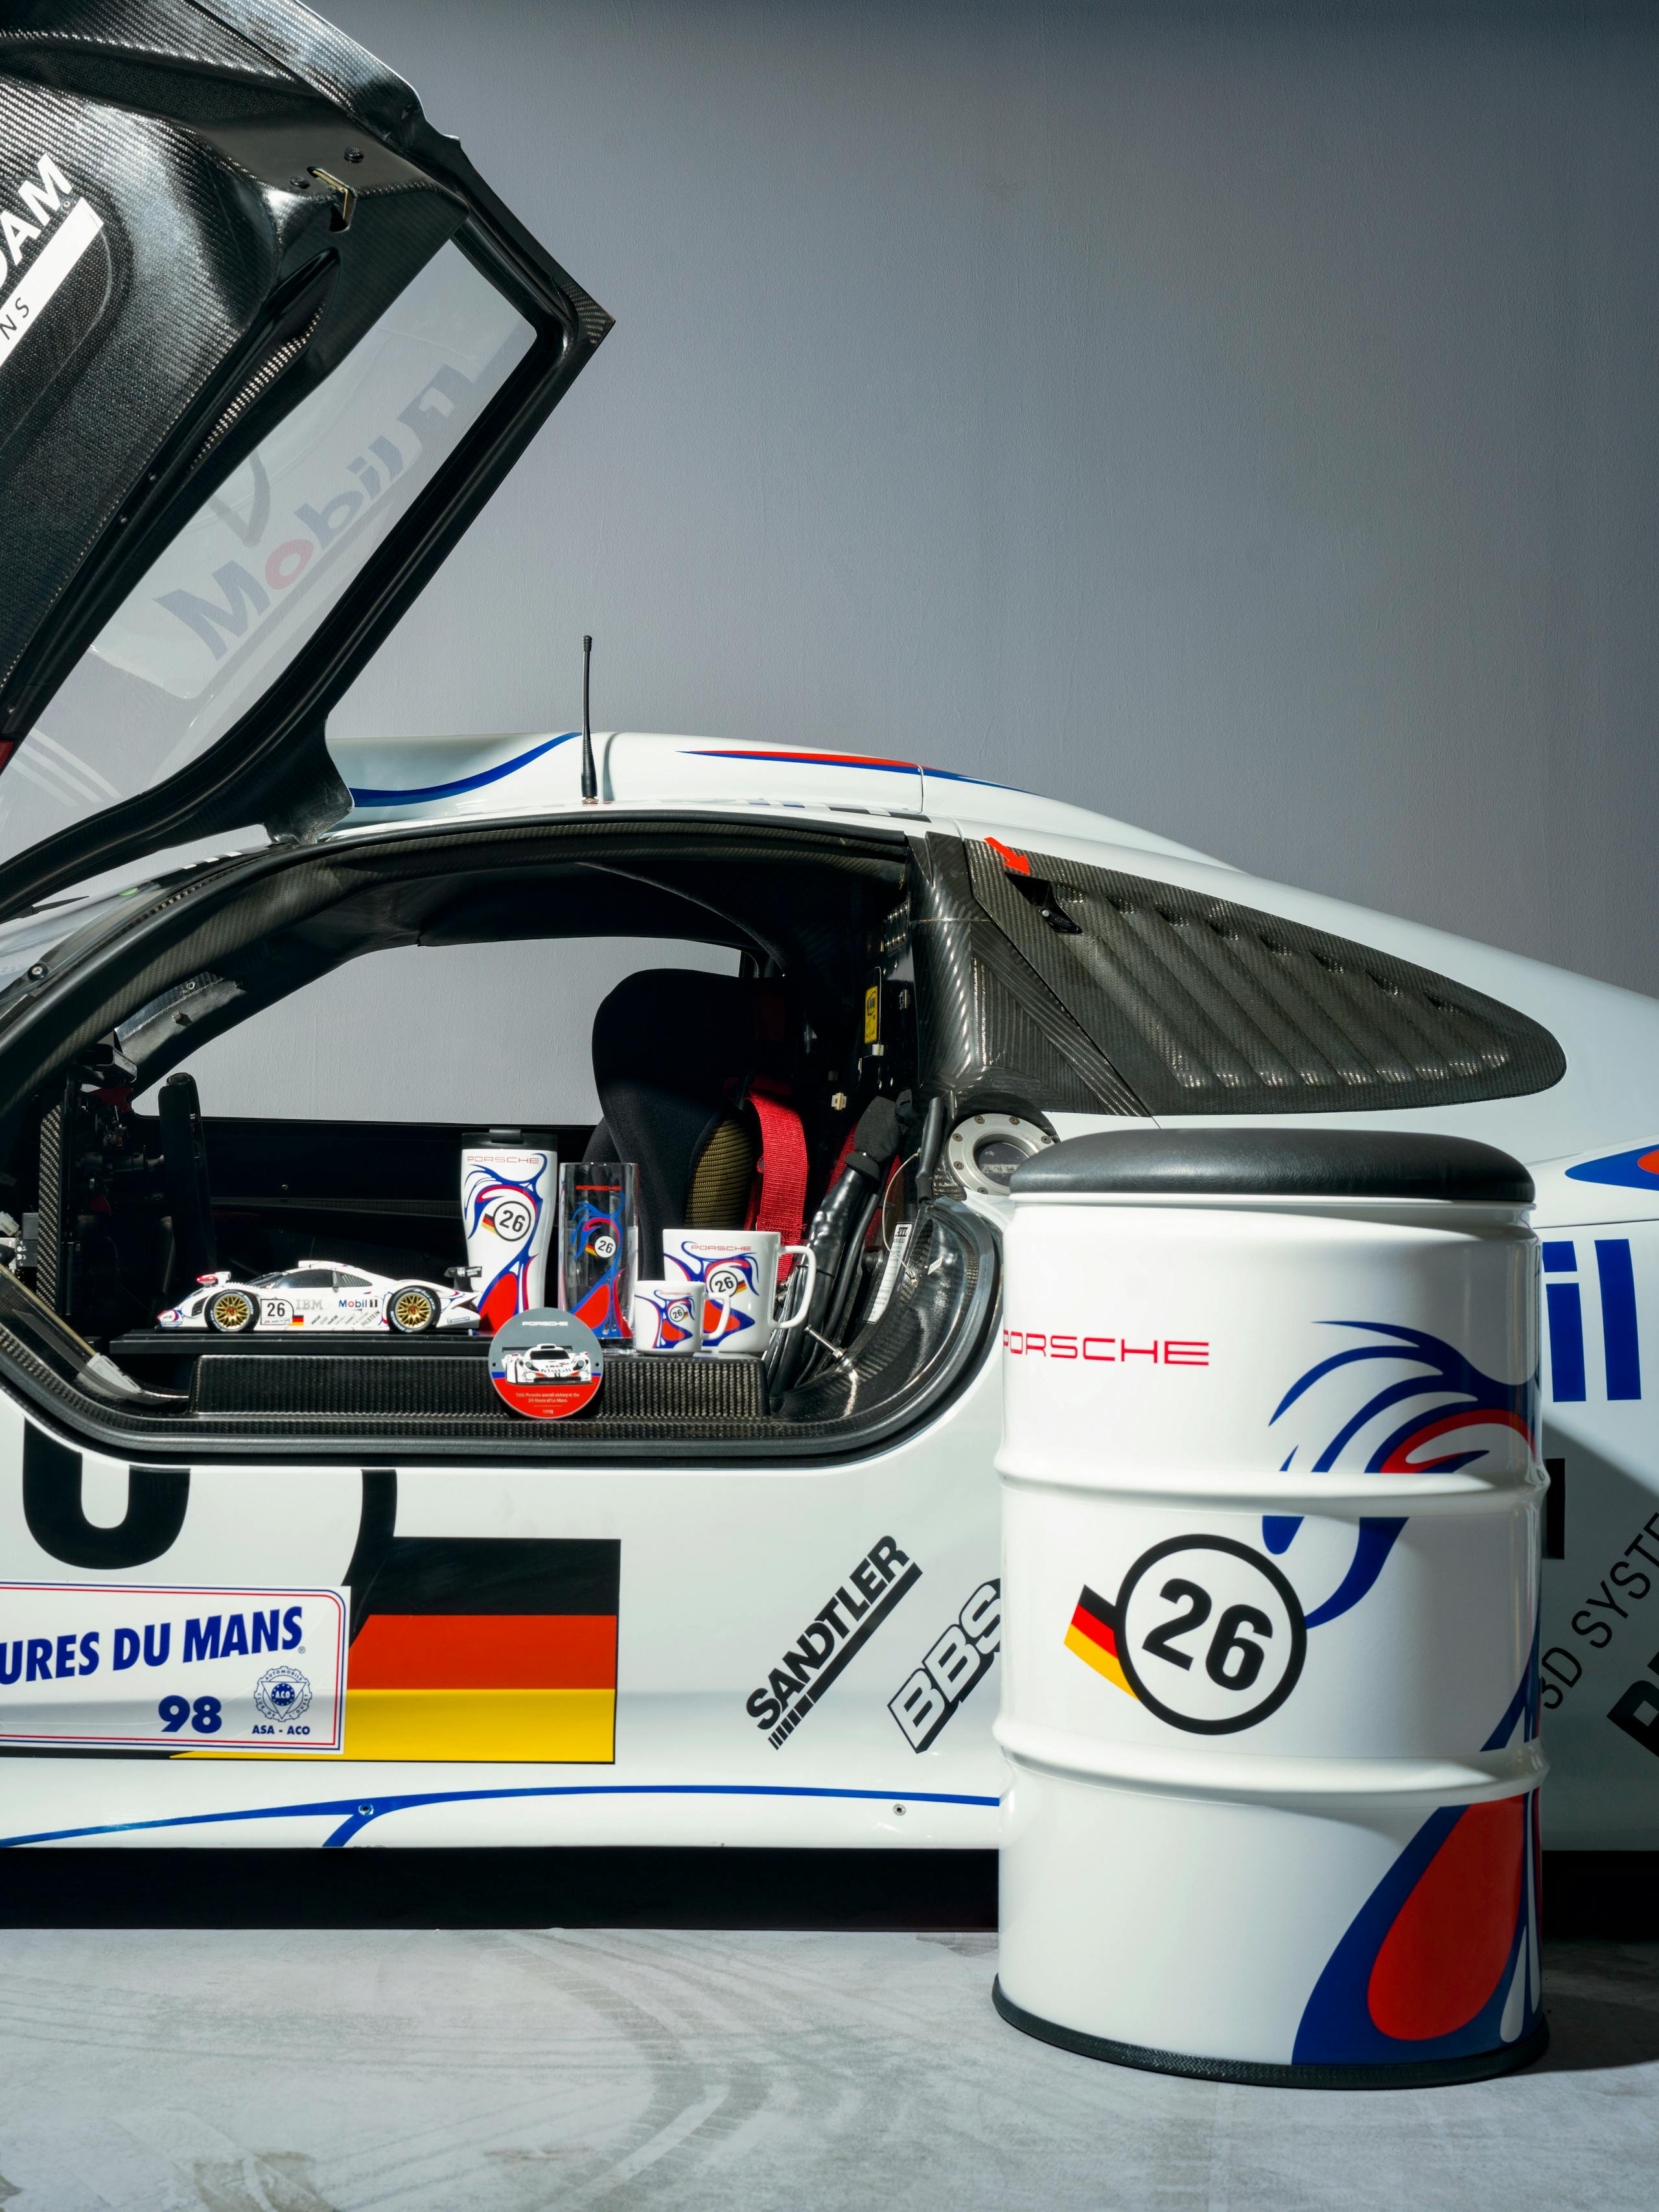 You can see a white Porsche with colourful details. In the foreground there is a barrel.